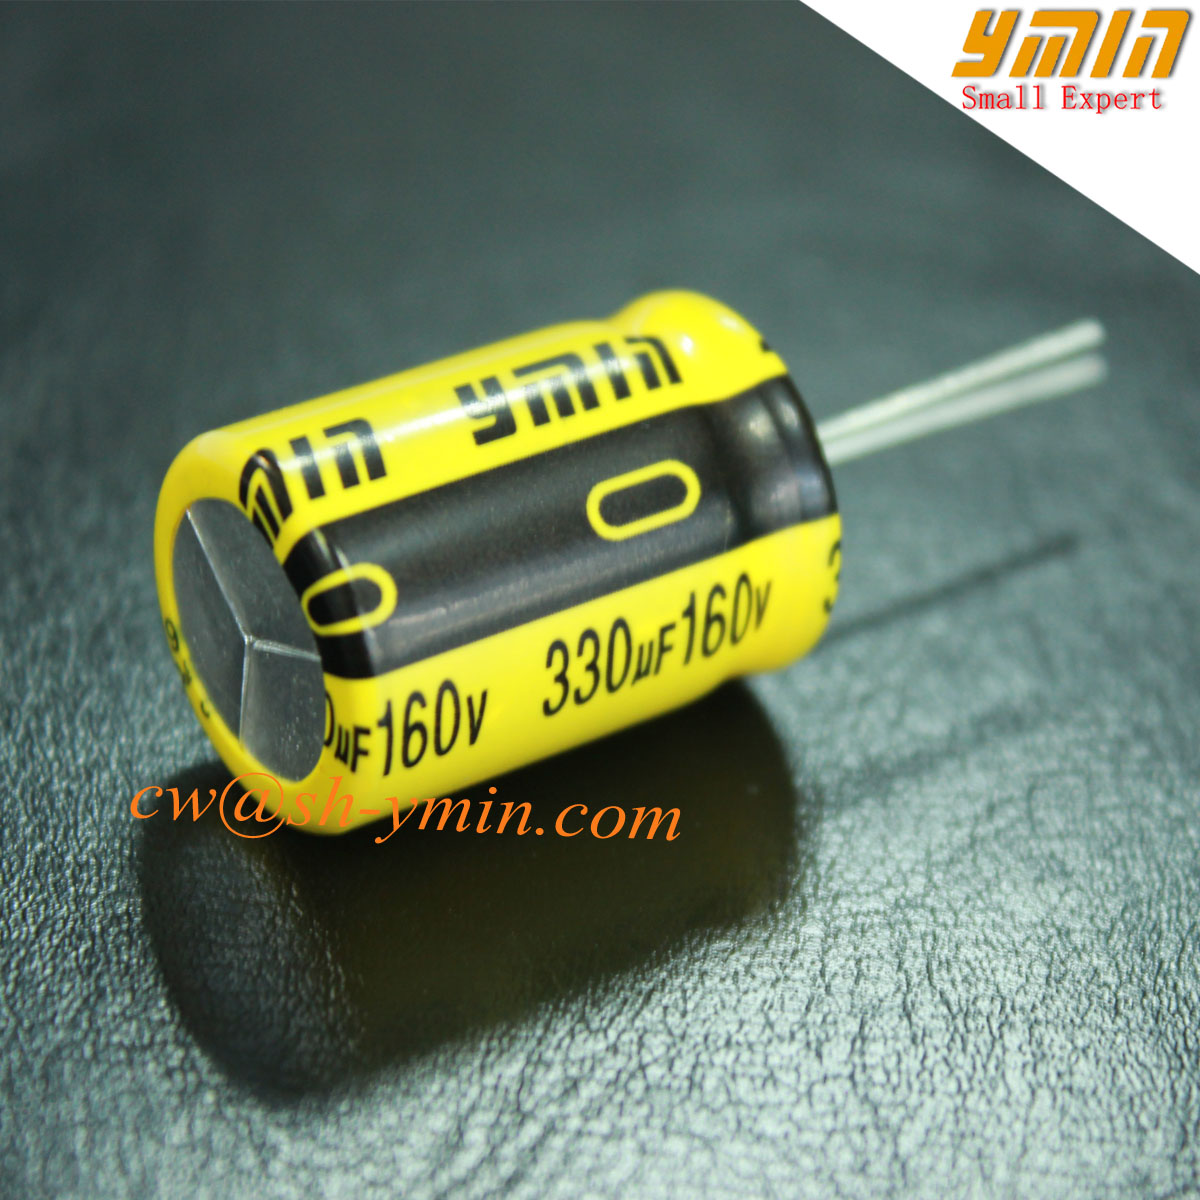 160V 330uF Capacitor Radial Aluminium Electrolytic Capacitor for LED Driver RoHS